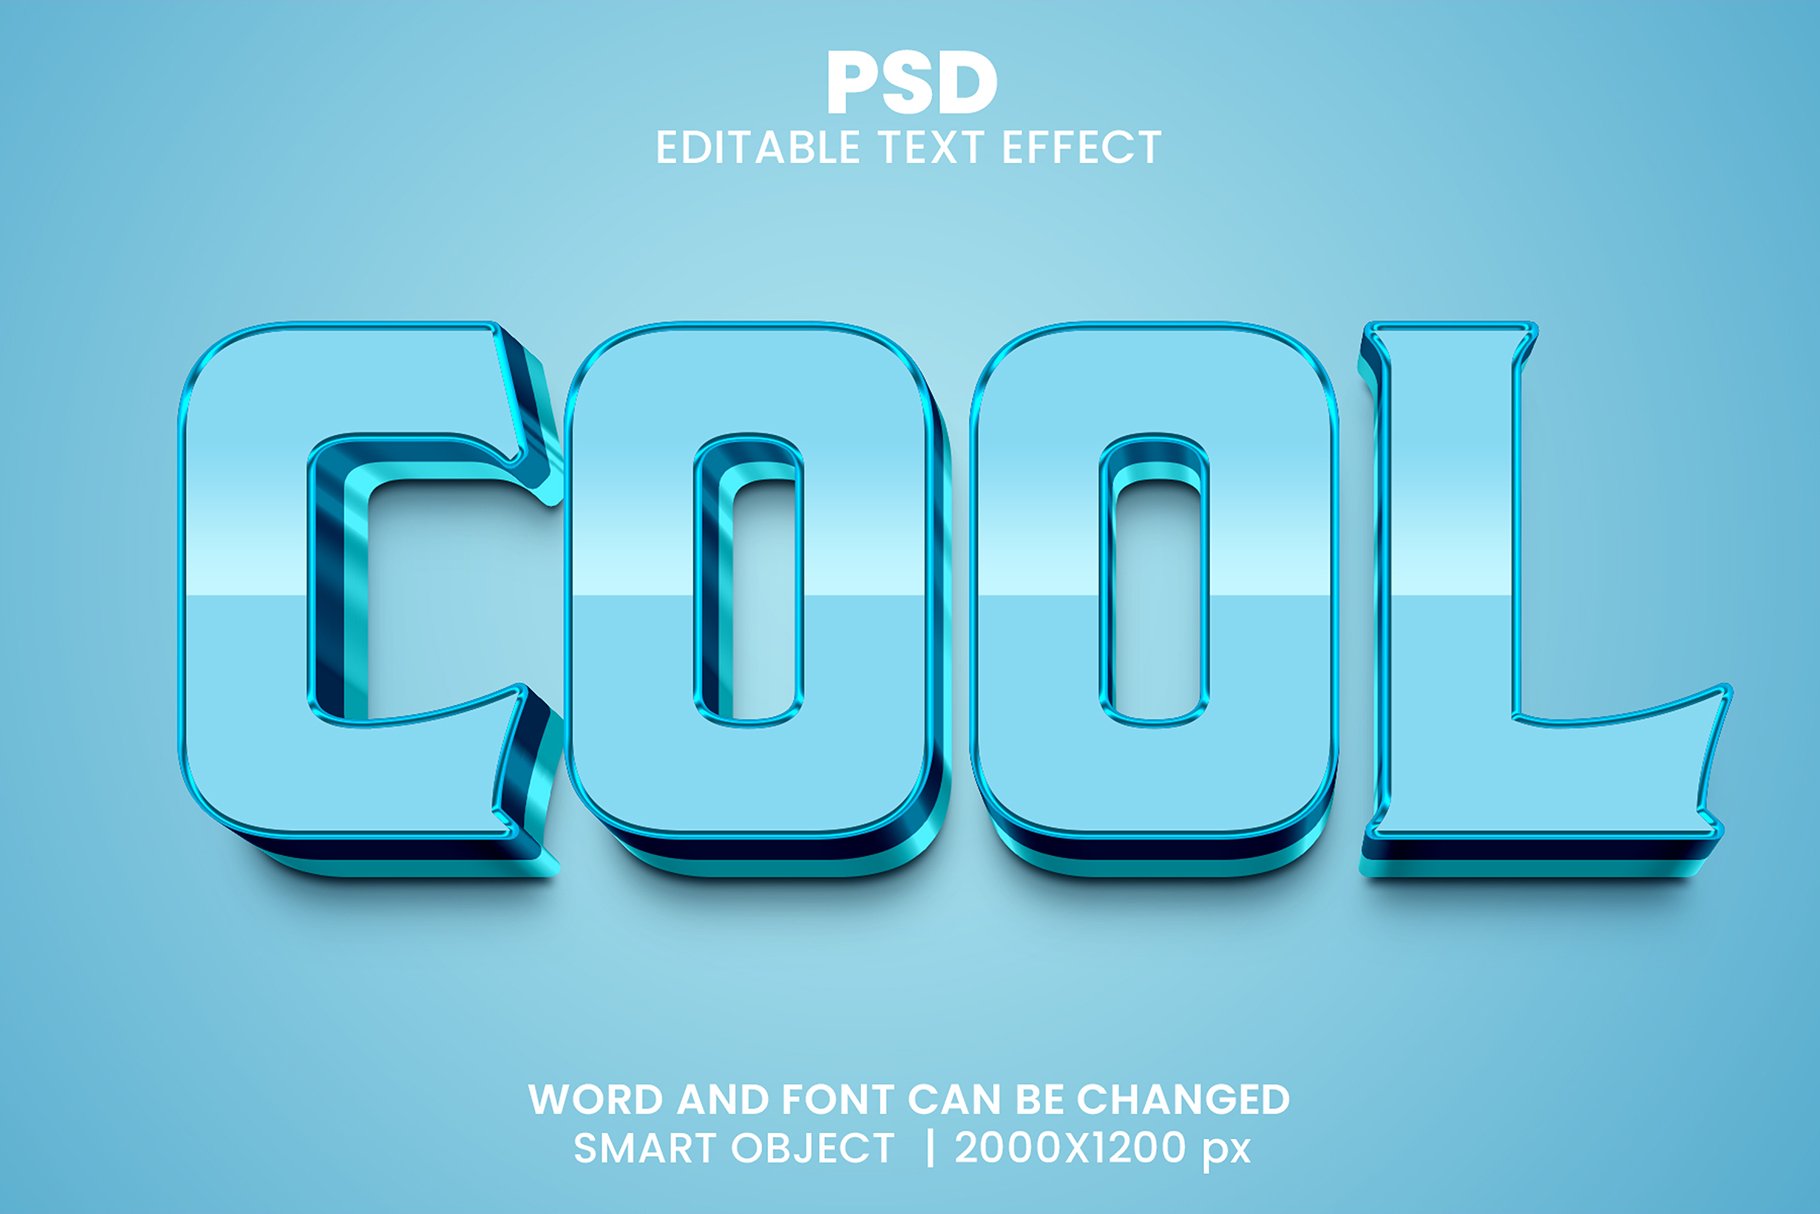 Cool 3d Editable Psd Text Effectcover image.